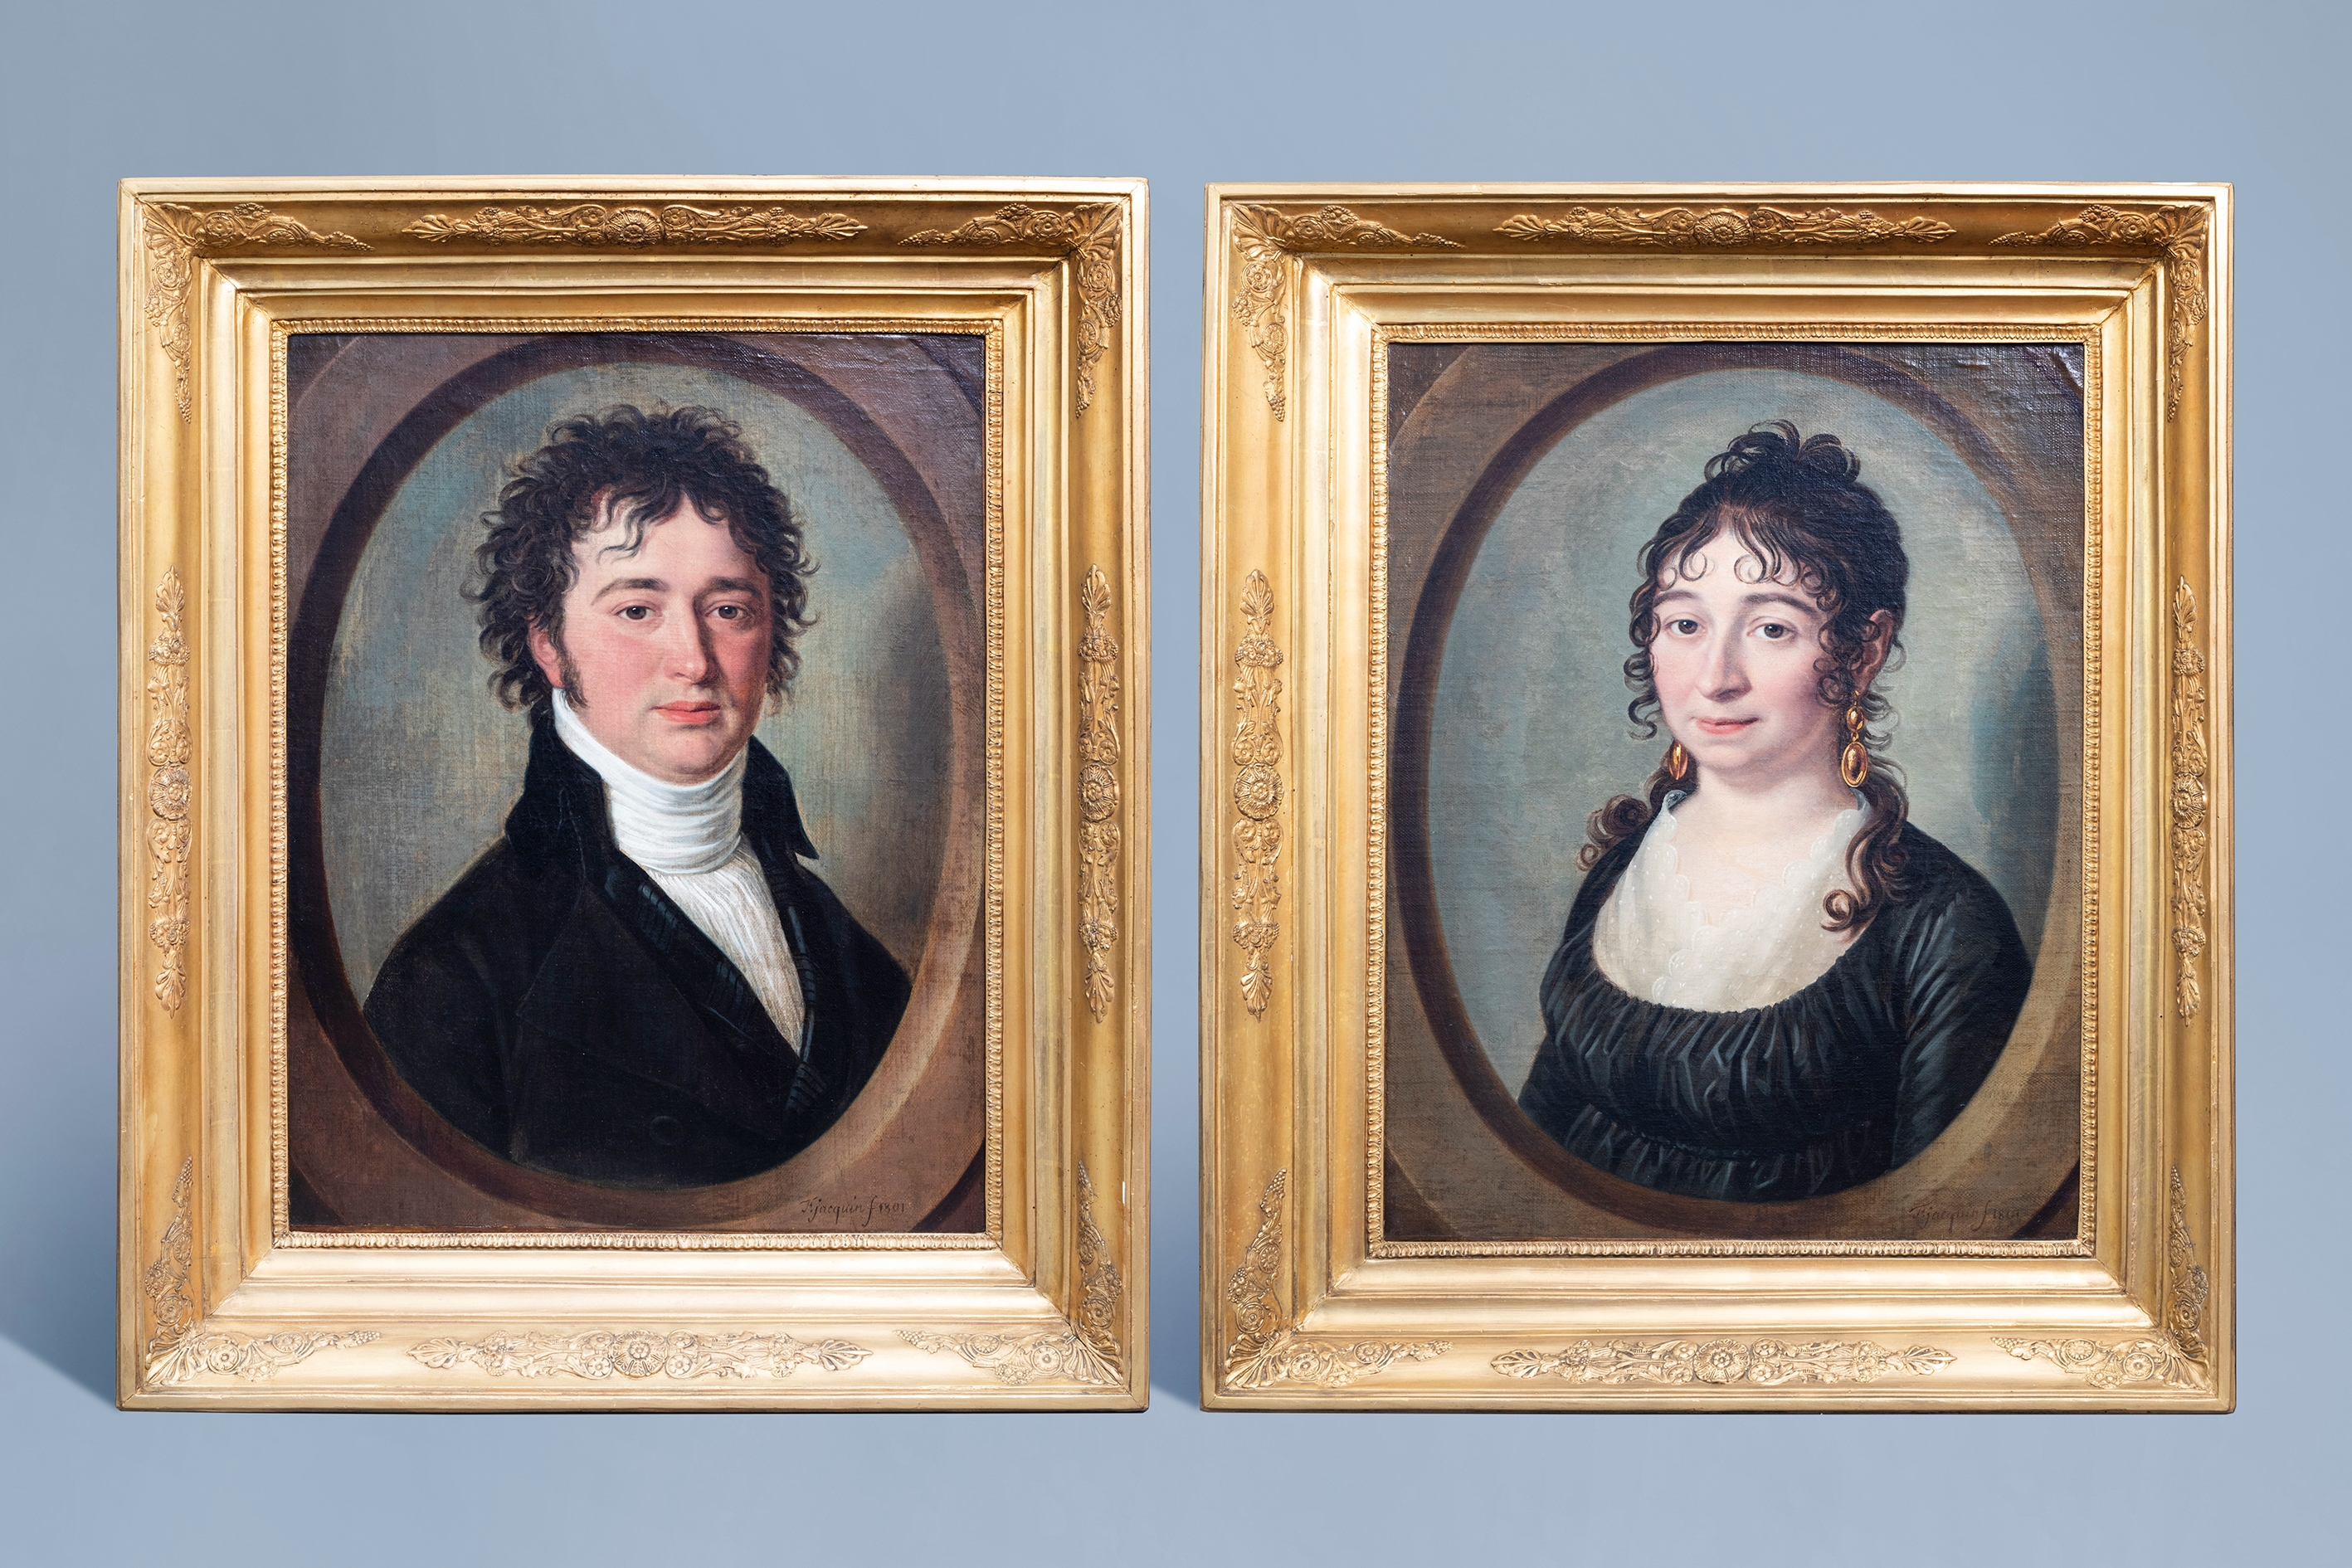 Portraits of L.B. Nillis and his wife Jeanne Marie Carolina Van Meerbeeck by François Jacquin